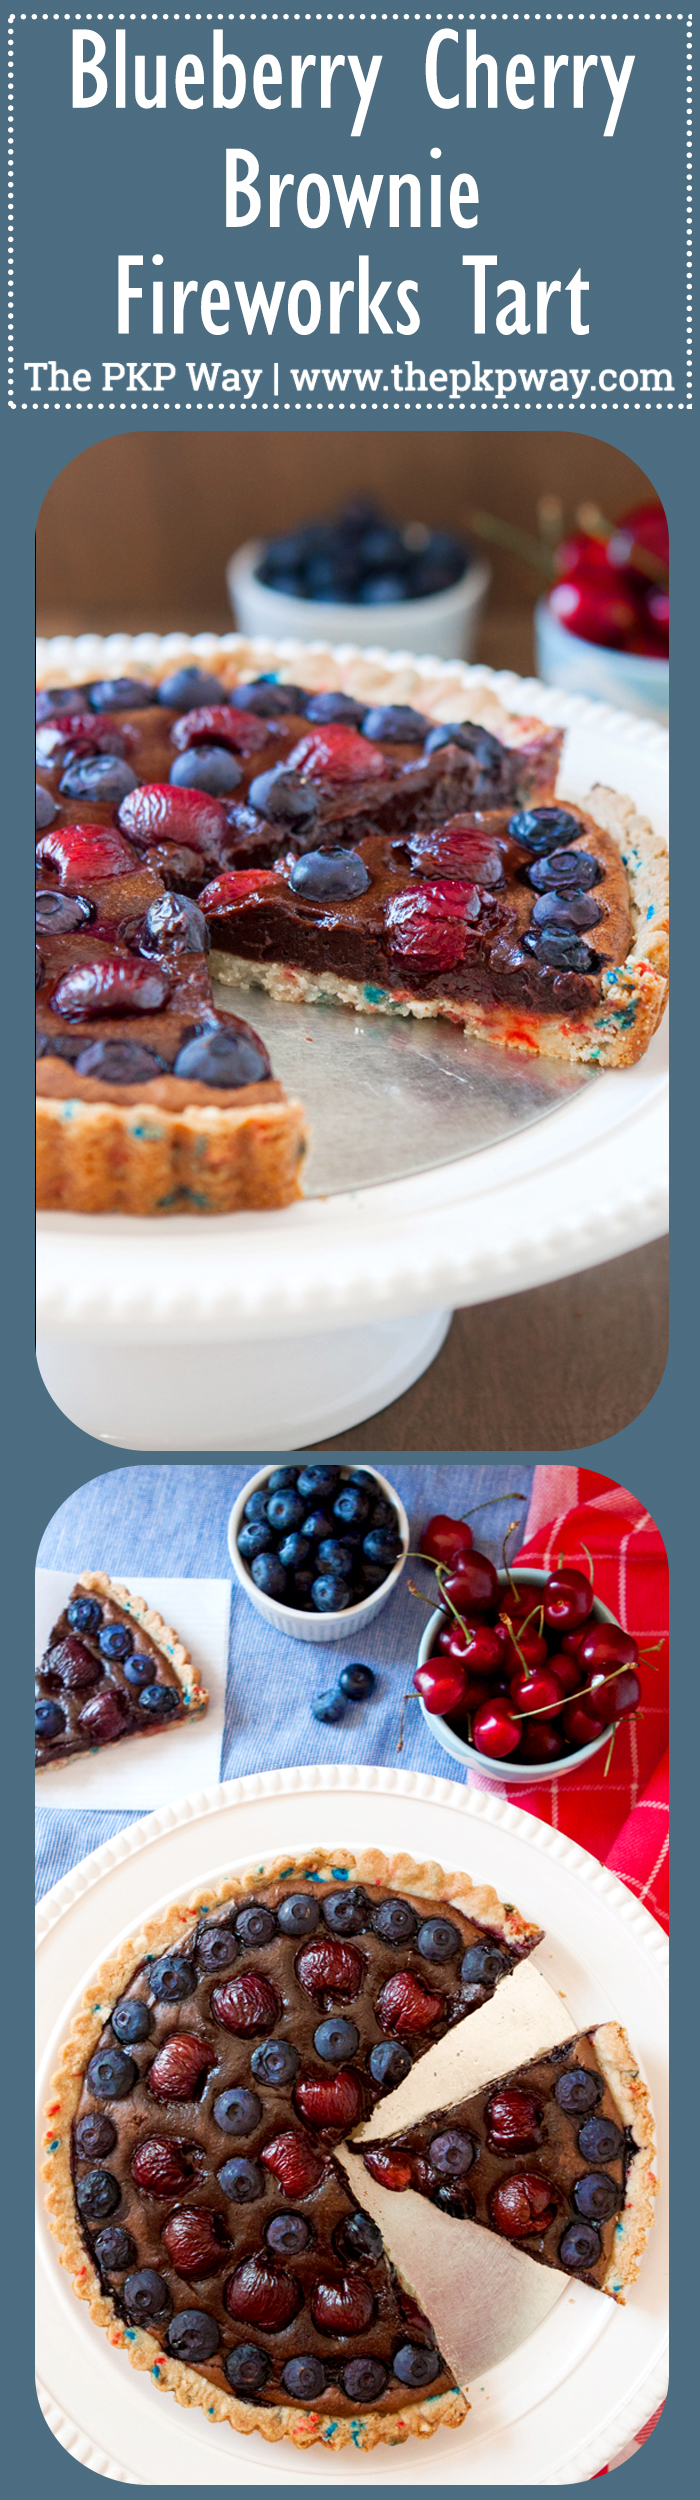 A fudgy brownie studded with cherries and blueberries, atop a shortbread crust, this Blueberry & Cherry Brownie Fireworks Tart is perfect for your 4th of July festivities. 